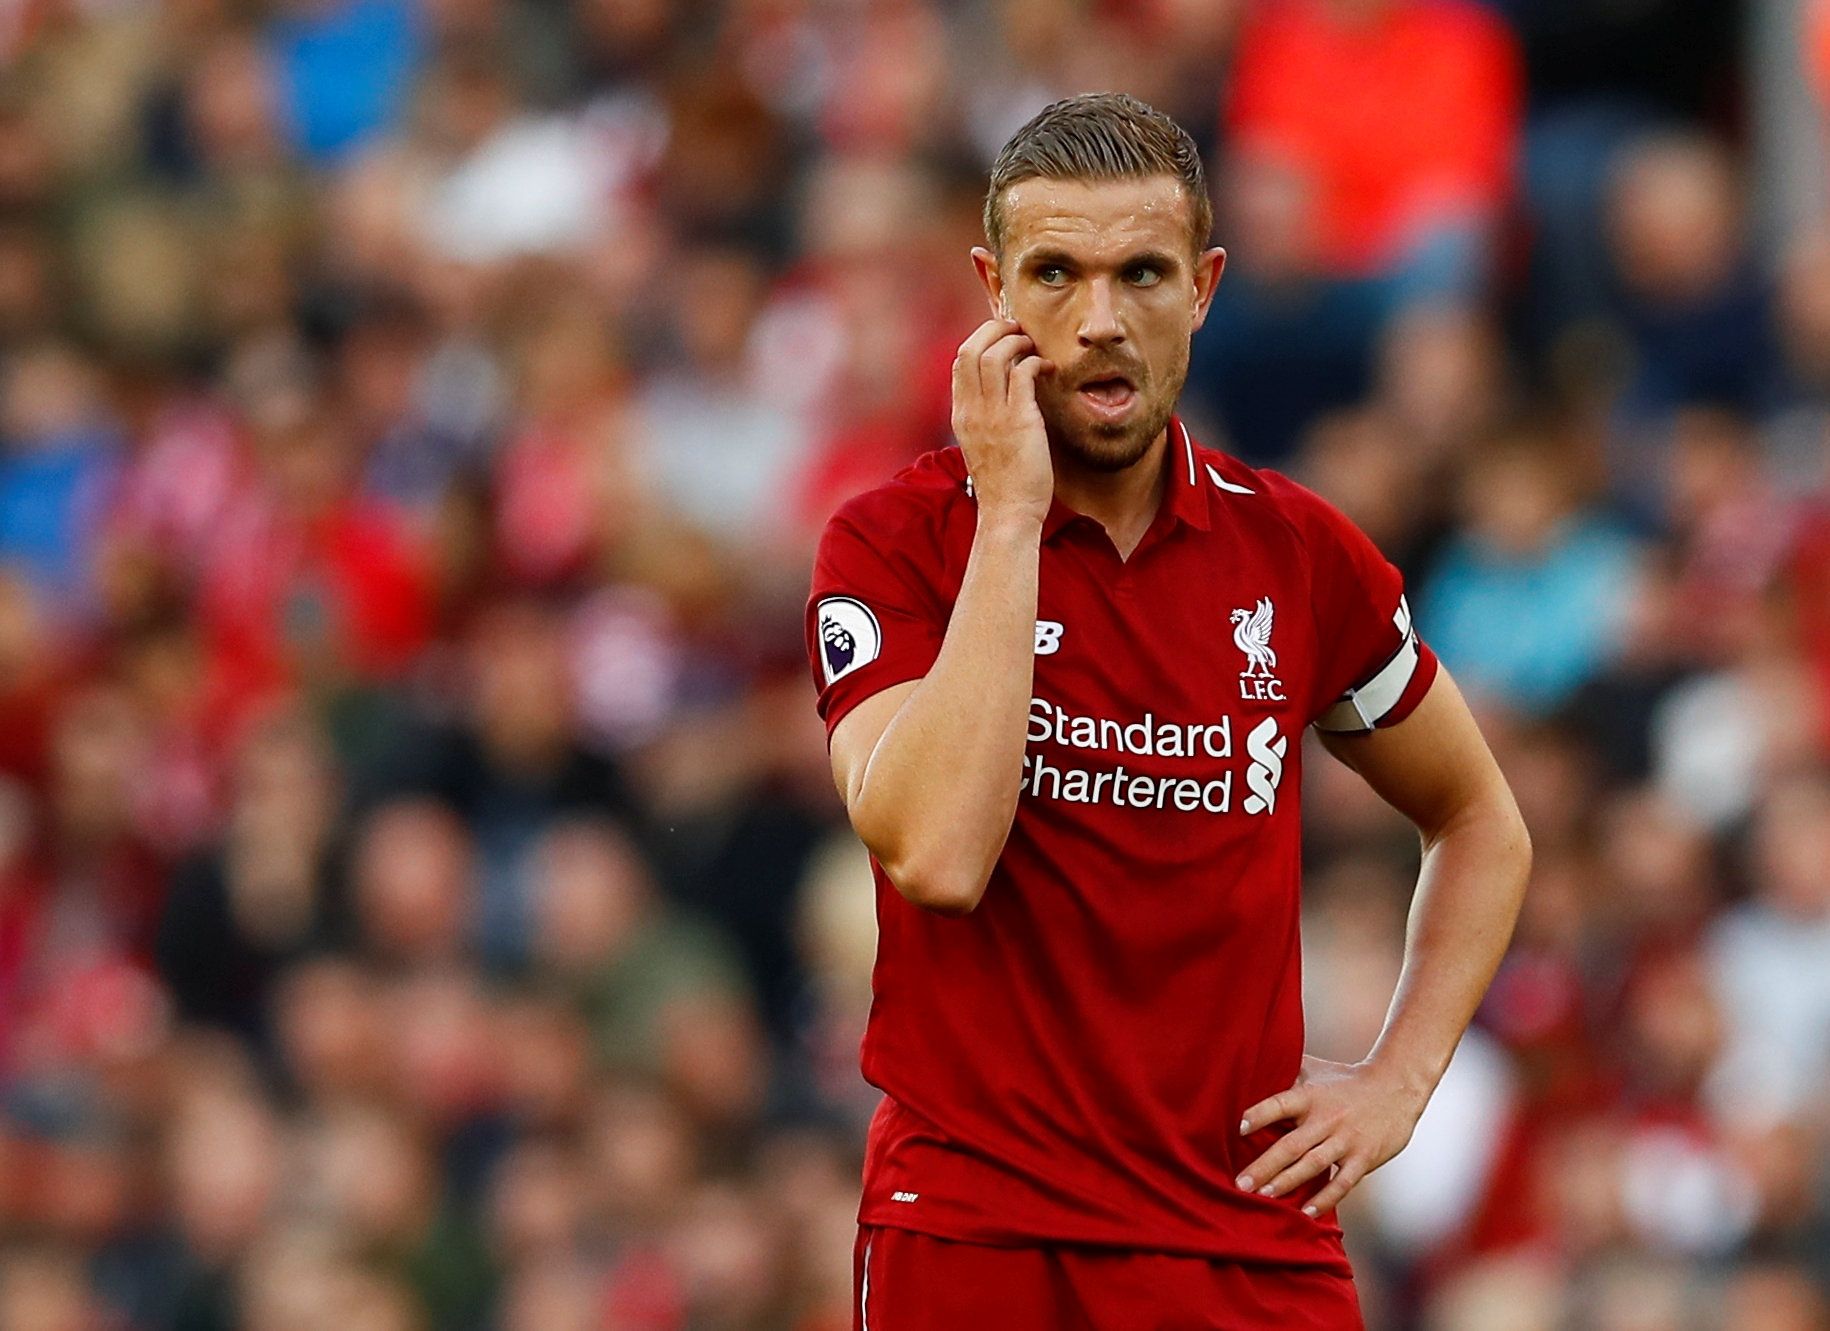 Soccer Football - Premier League - Liverpool v Brighton &amp; Hove Albion - Anfield, Liverpool, Britain - August 25, 2018  Liverpool's Jordan Henderson reacts   Action Images via Reuters/Jason Cairnduff  EDITORIAL USE ONLY. No use with unauthorized audio, video, data, fixture lists, club/league logos or 